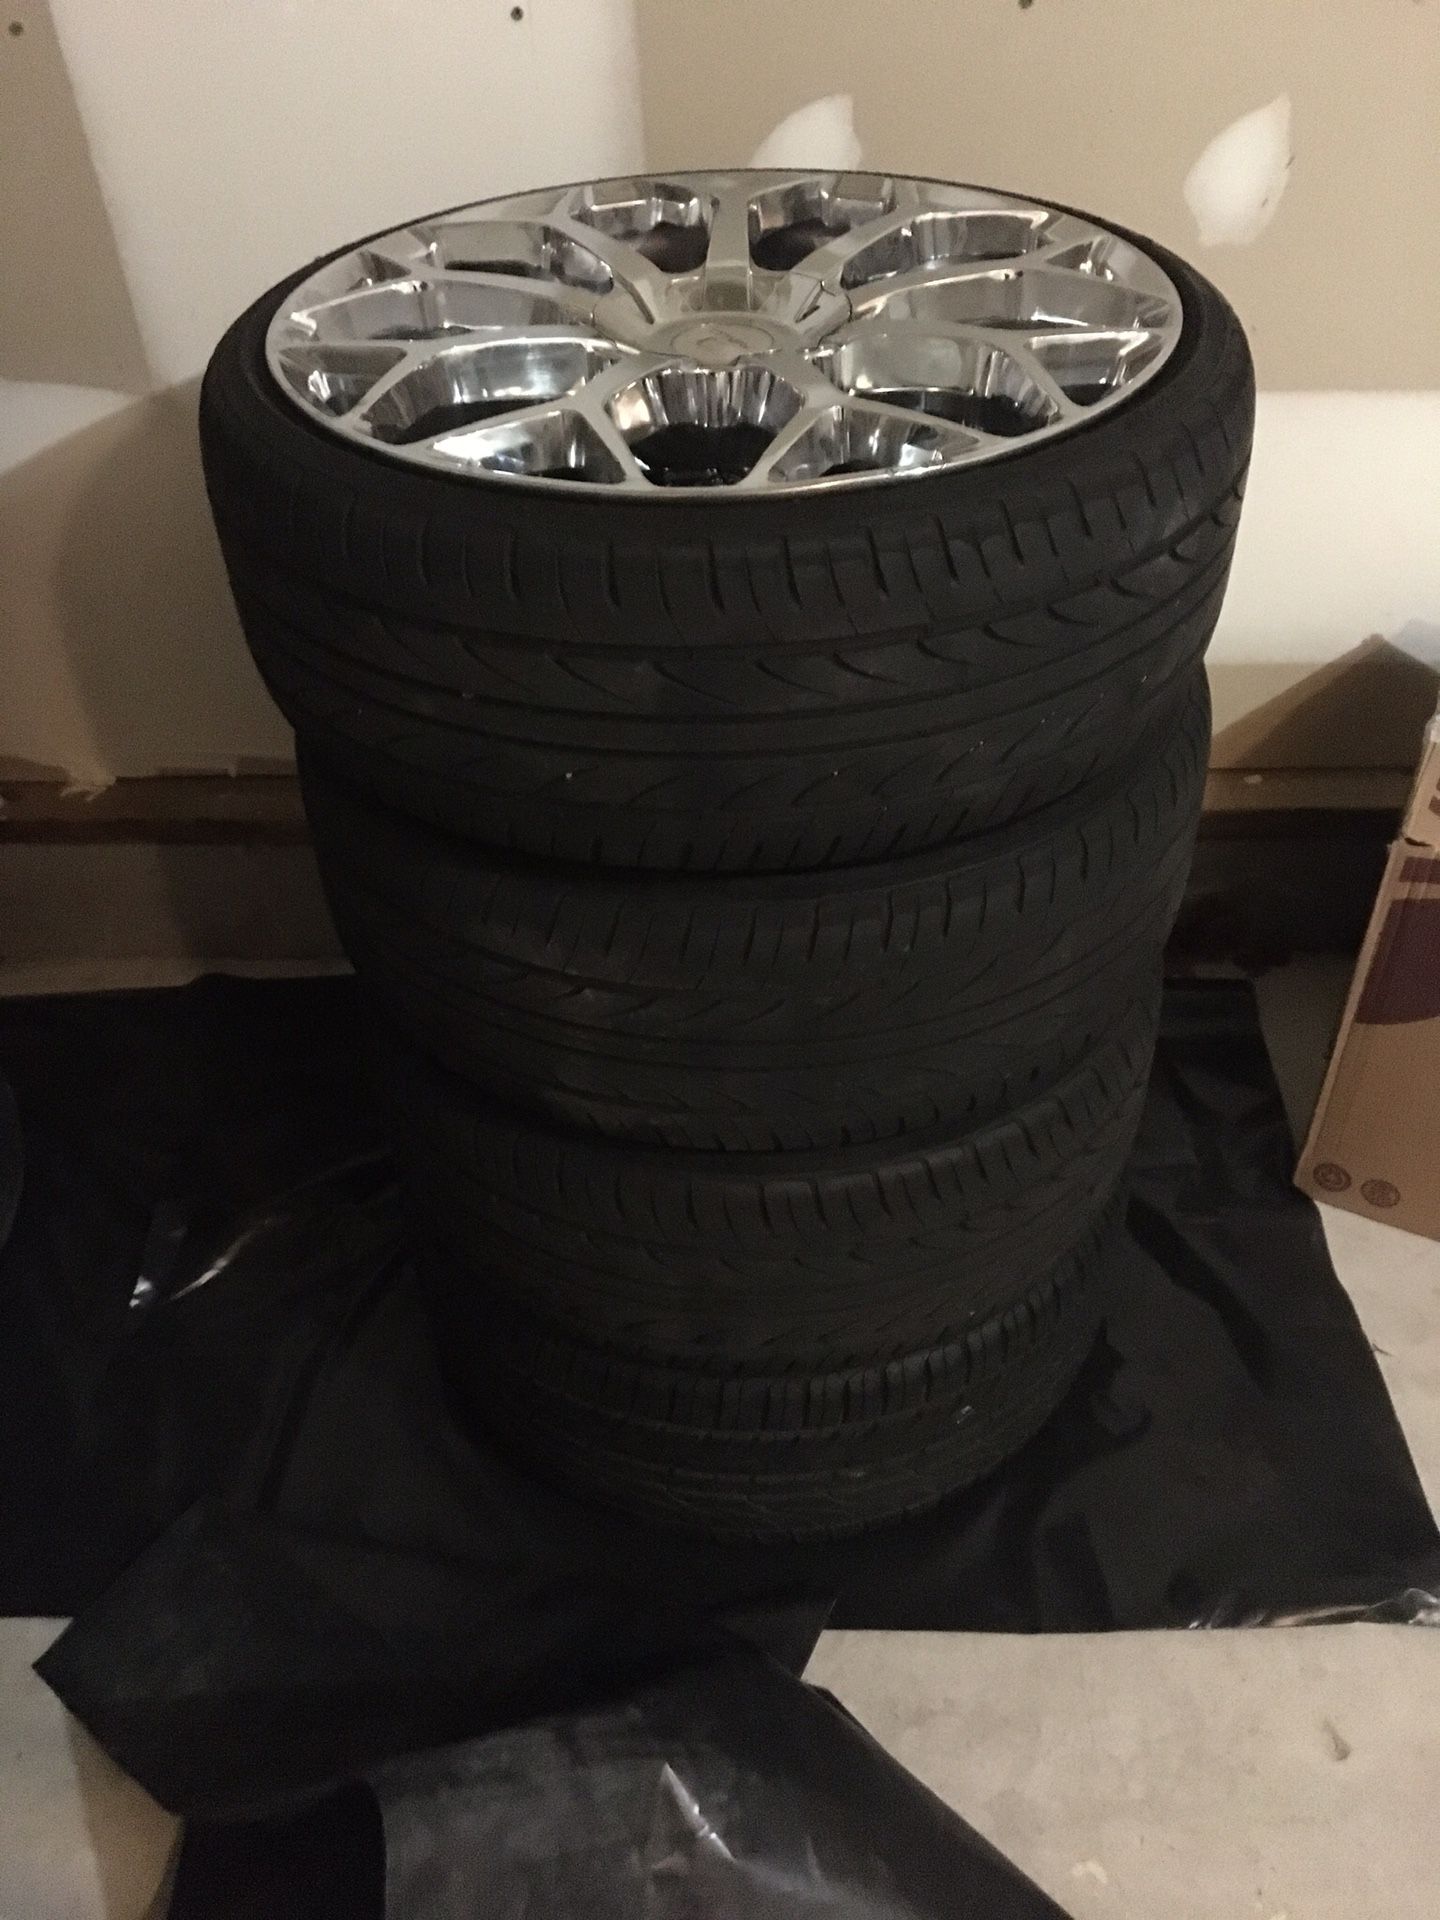 Sold ** ONLY TWO - 22” inch rims - Make Offer 